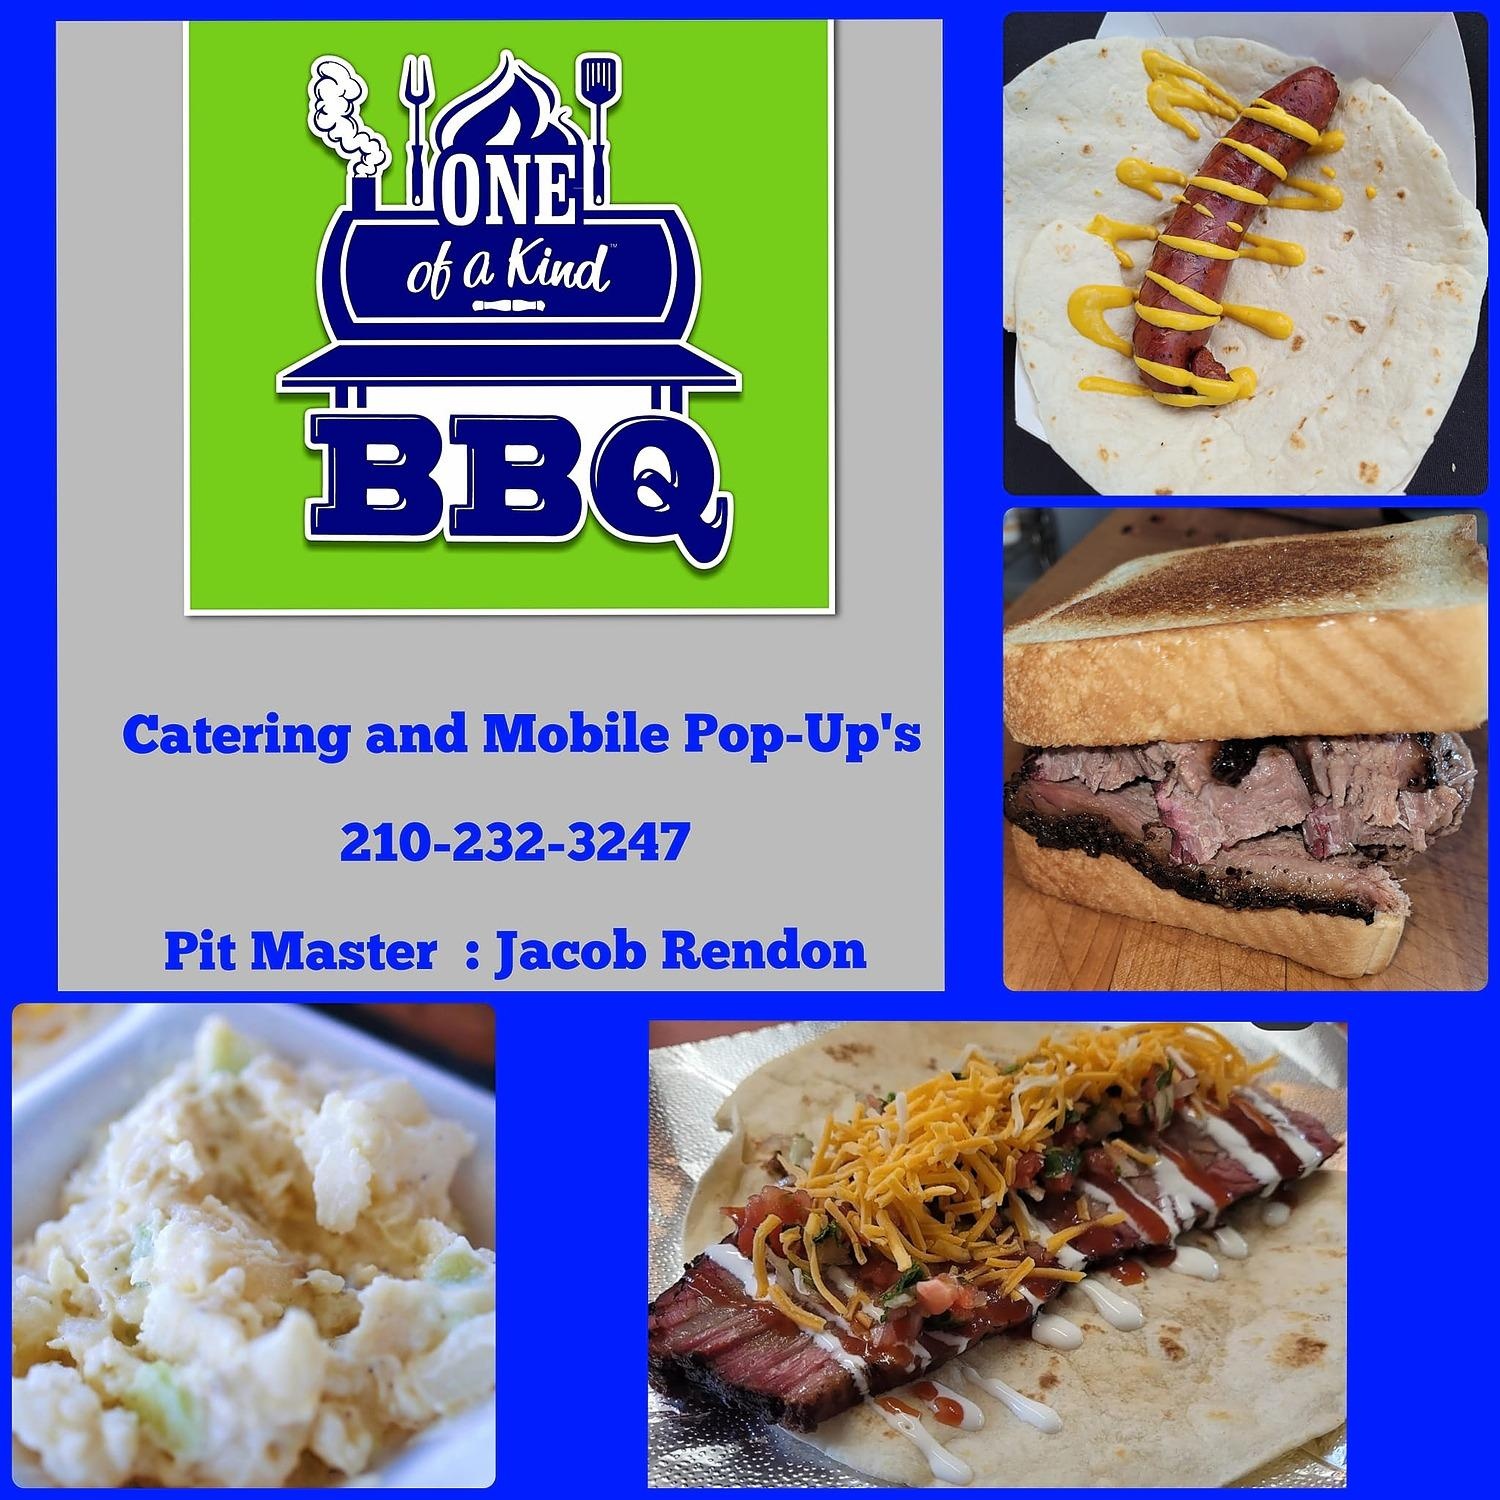 Long island bbq catering and mobile pop ups for The Montecristo Apartments Apartments in Stone Oak, San Antonio.